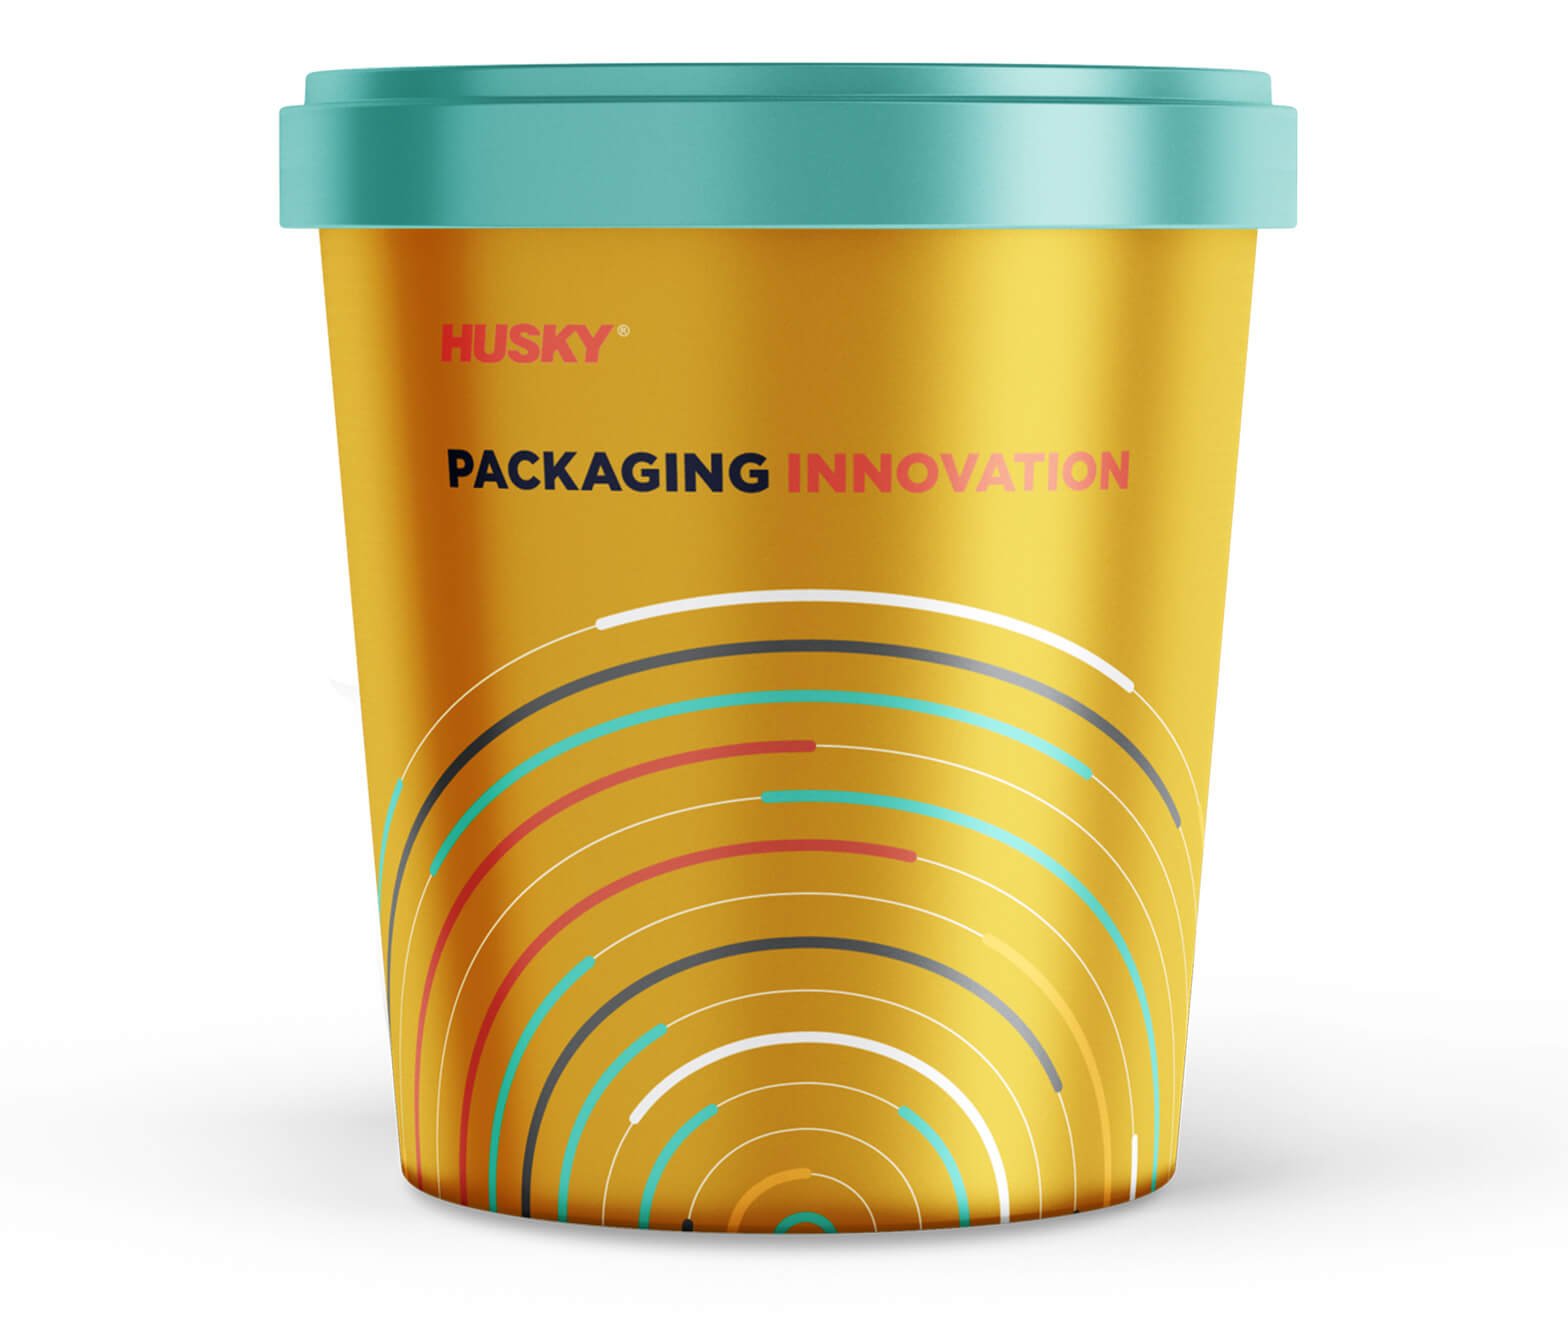 “Husk packaging innovation.” A plastic tub an example of consumer packaged goods.